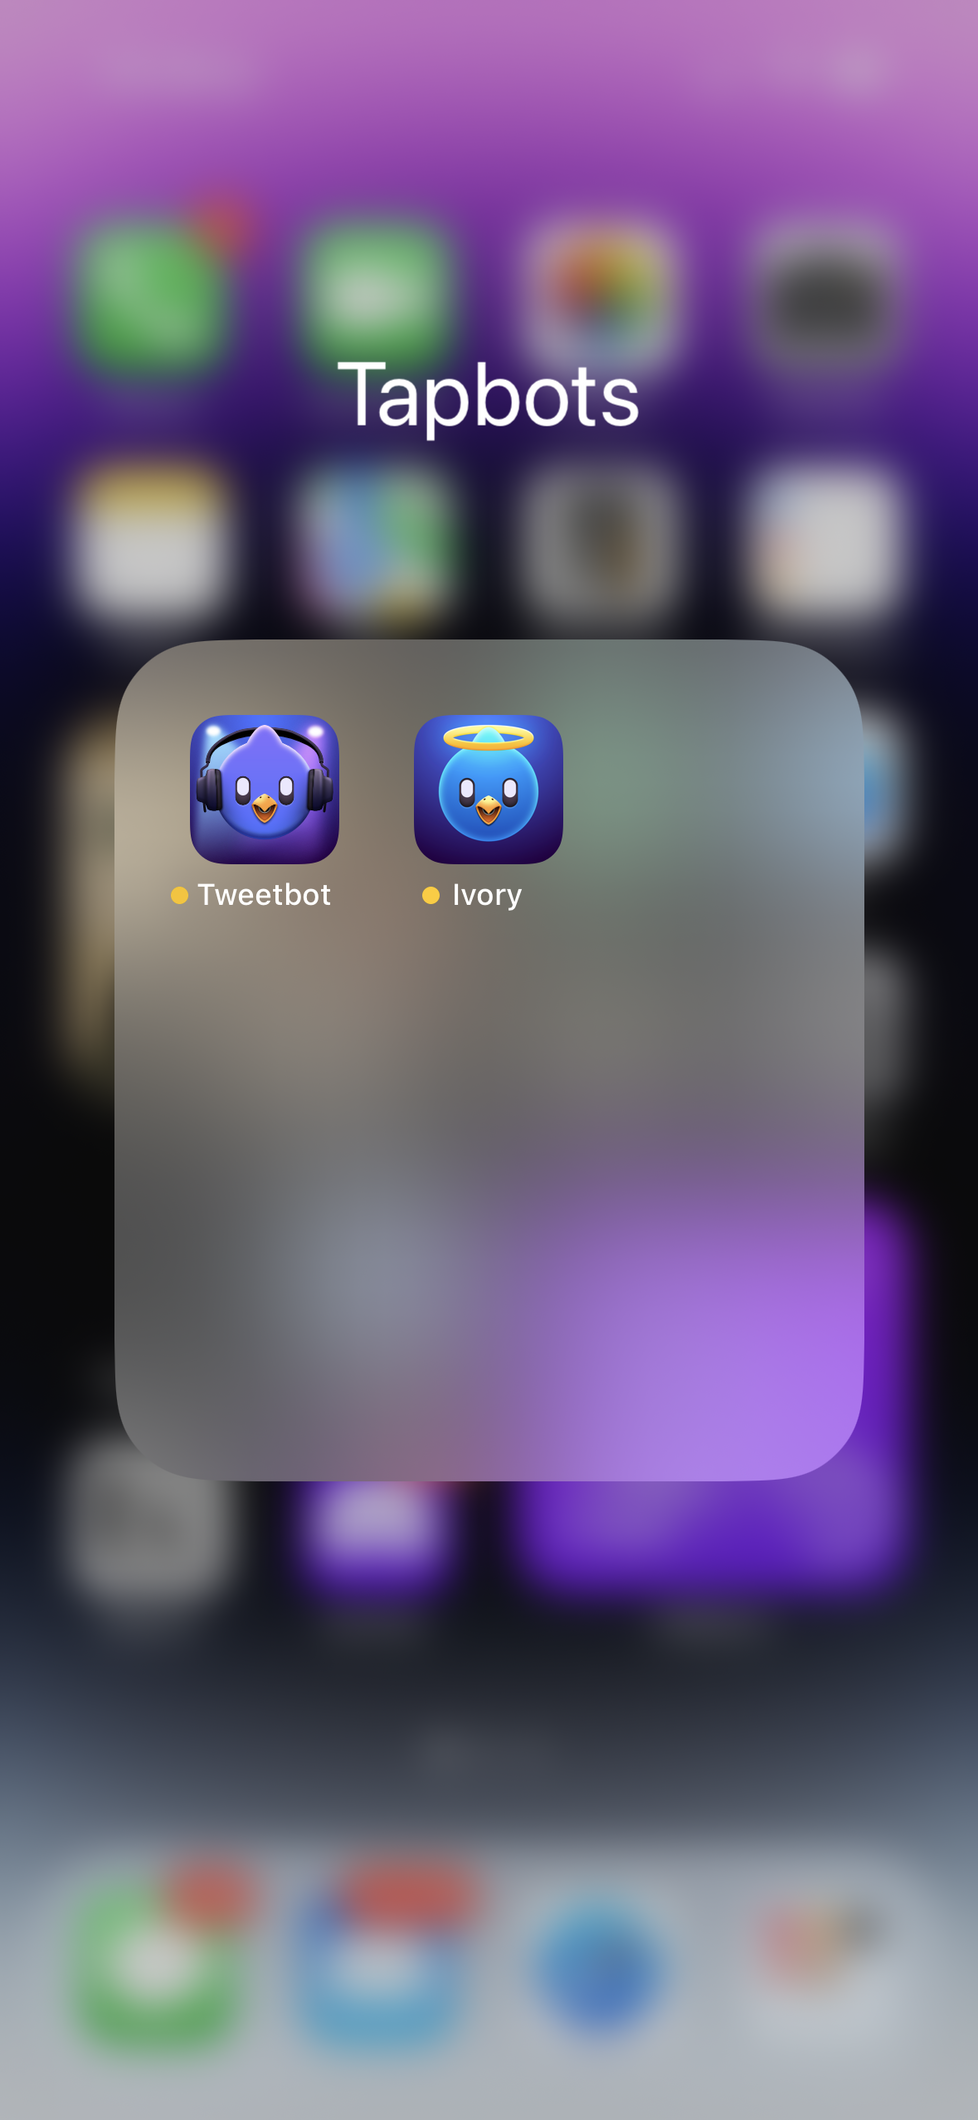 New Ivory icon (Tweetbot bird with angel halo) next to my Tweetbot app on my Home Screen in Tapbots folder